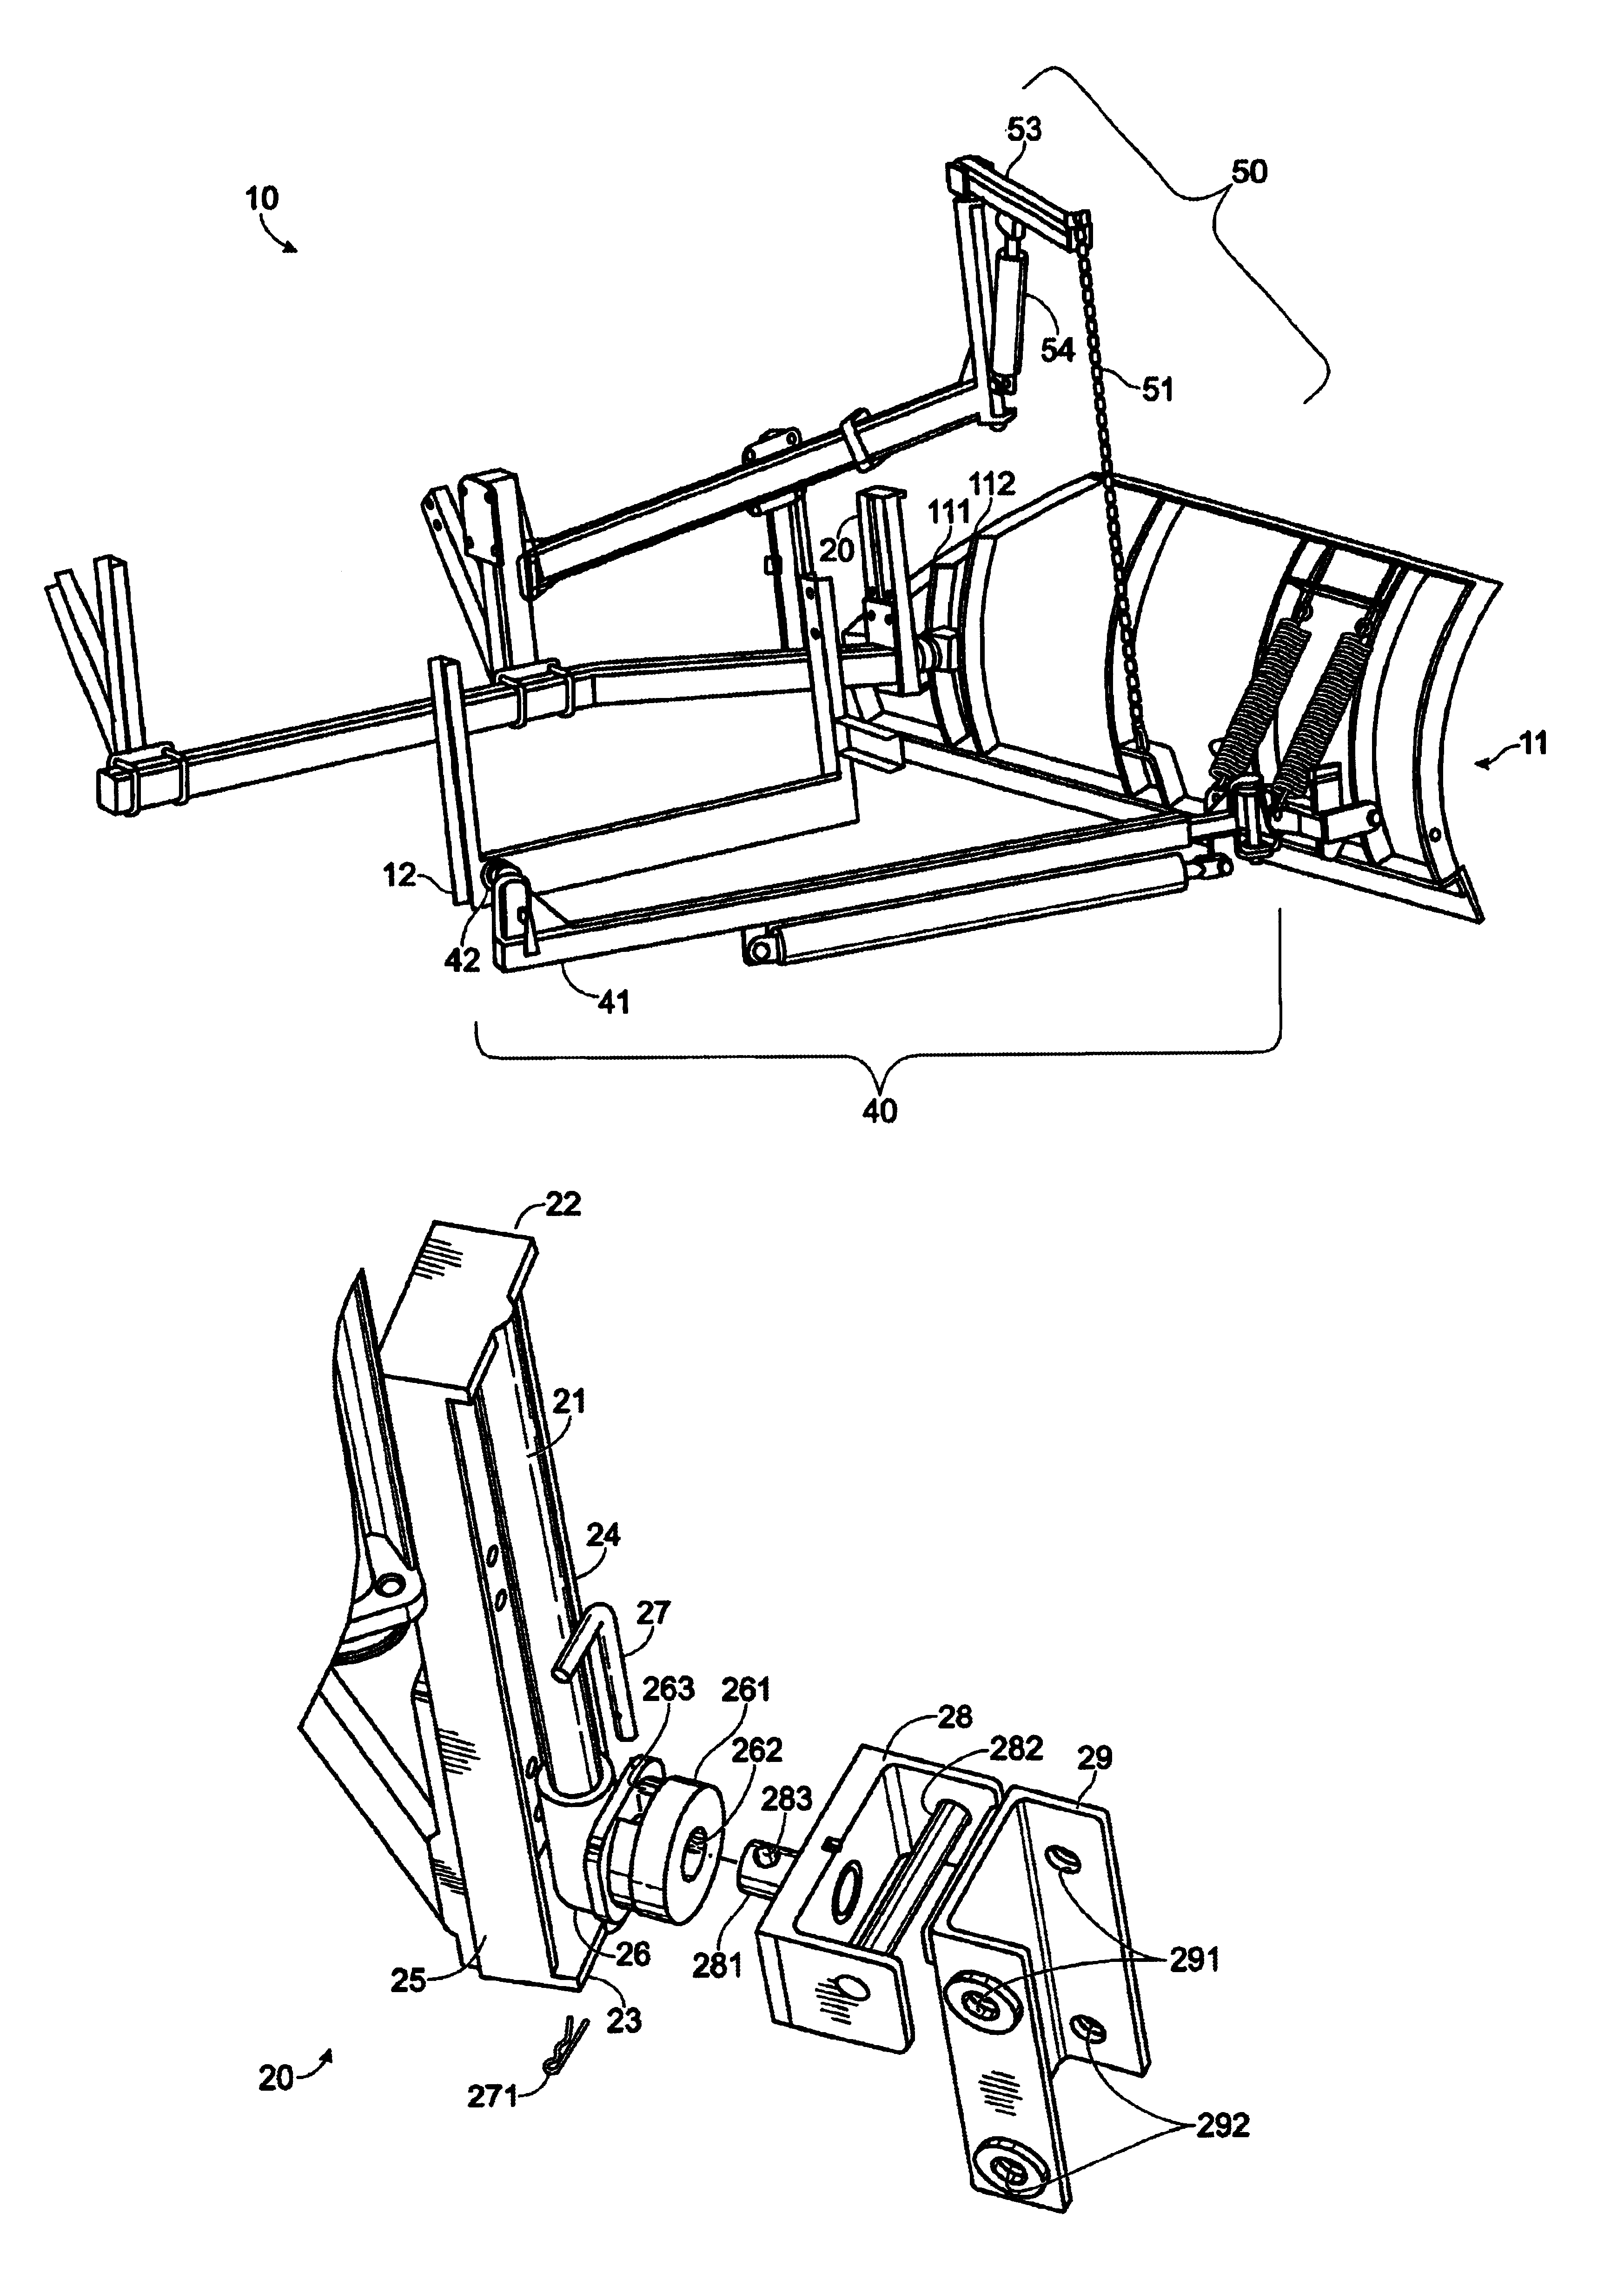 Adjustable side plow assembly